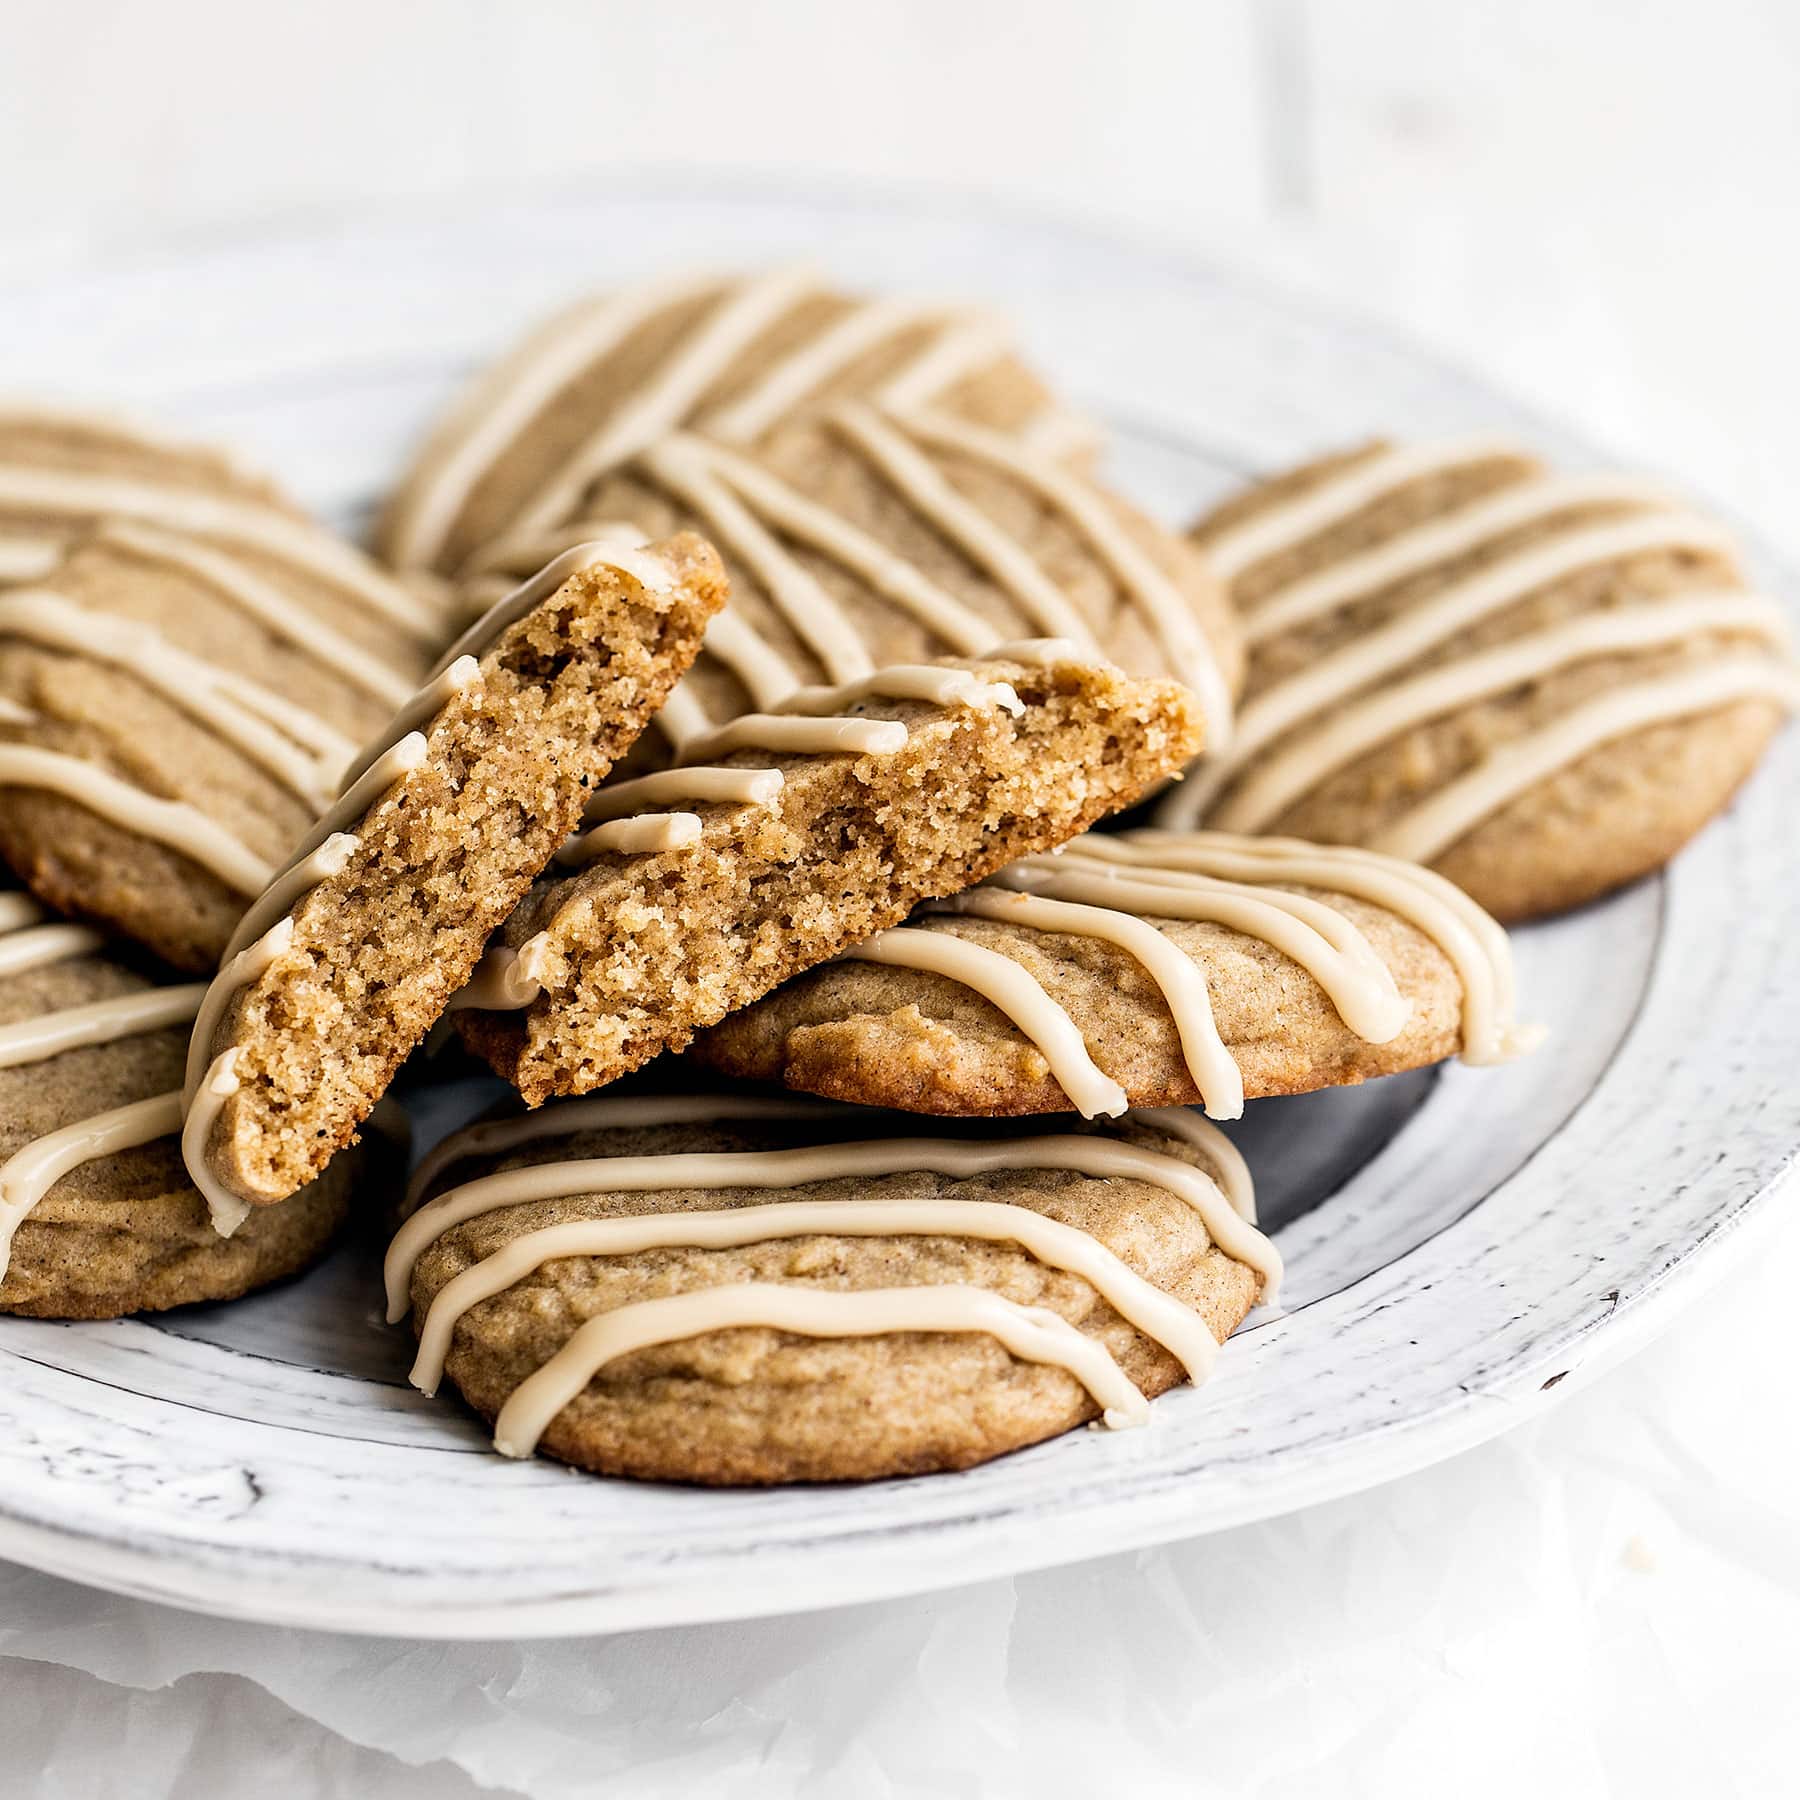 Easy Chai Sugar Cookies are thick, soft, loaded with sweet warm spices, and topped with a simple espresso glaze. Perfect 30 minute recipe for a cozy autumn day!